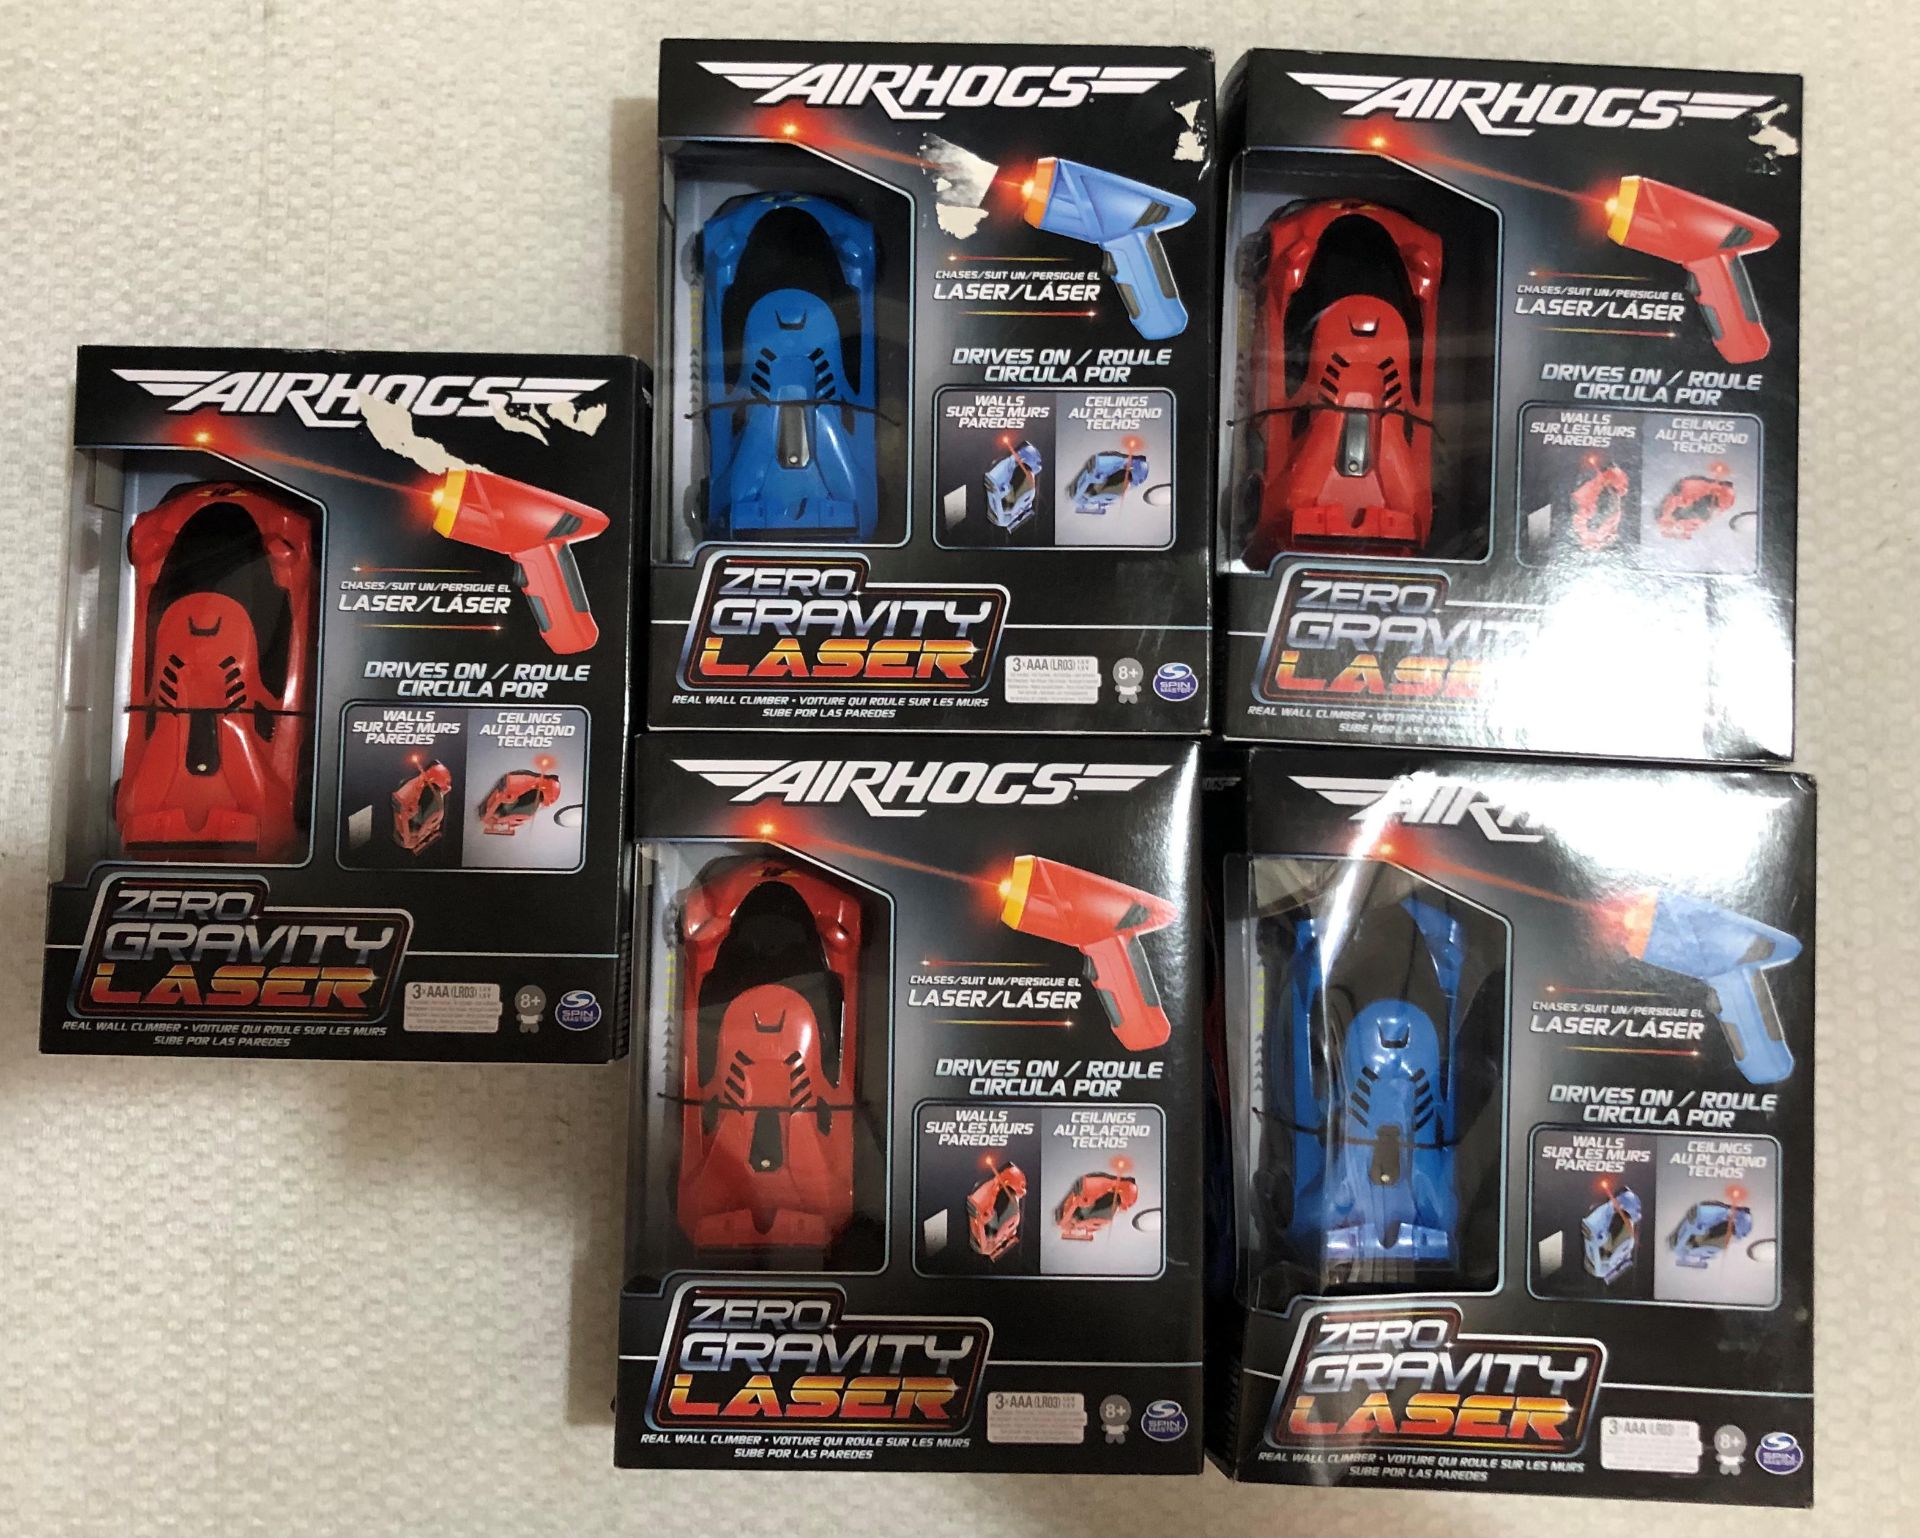 5 x Airhogs Zero Gravity Laser Wall Climbing Car - New/Boxed - HTYS328 - CL987 - Location: - Image 4 of 5